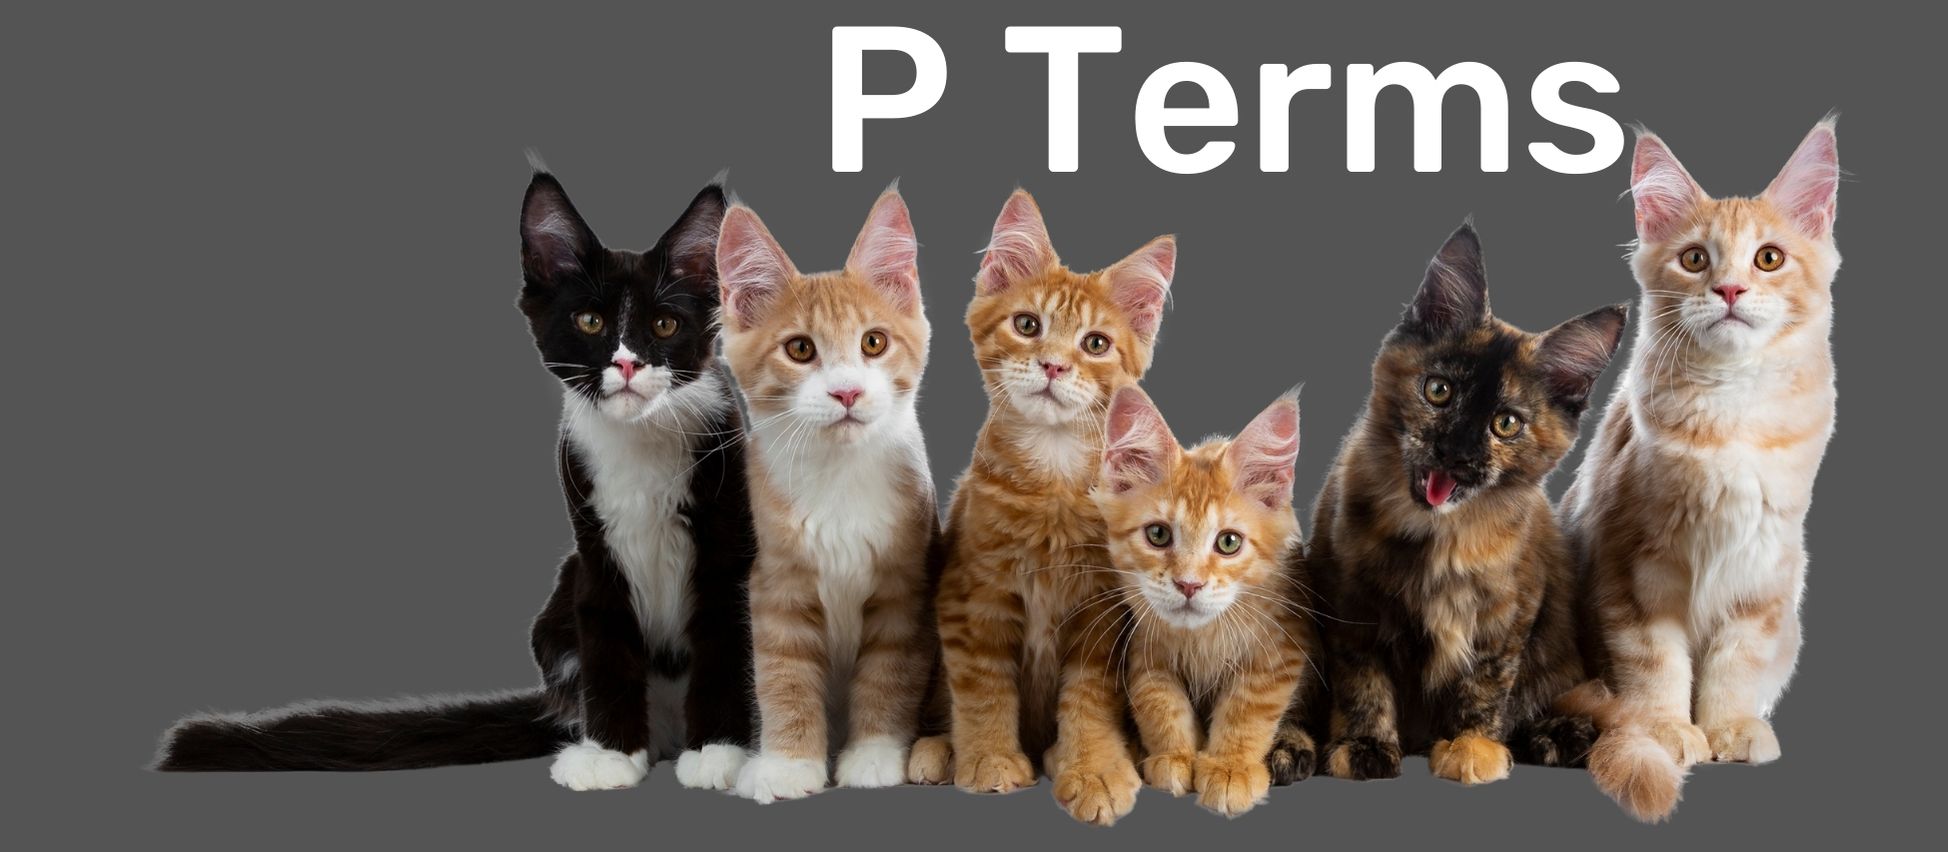 Group of six cats in front of a gray background with text reading 'P Terms' at the top to indicate a new section of the glossary